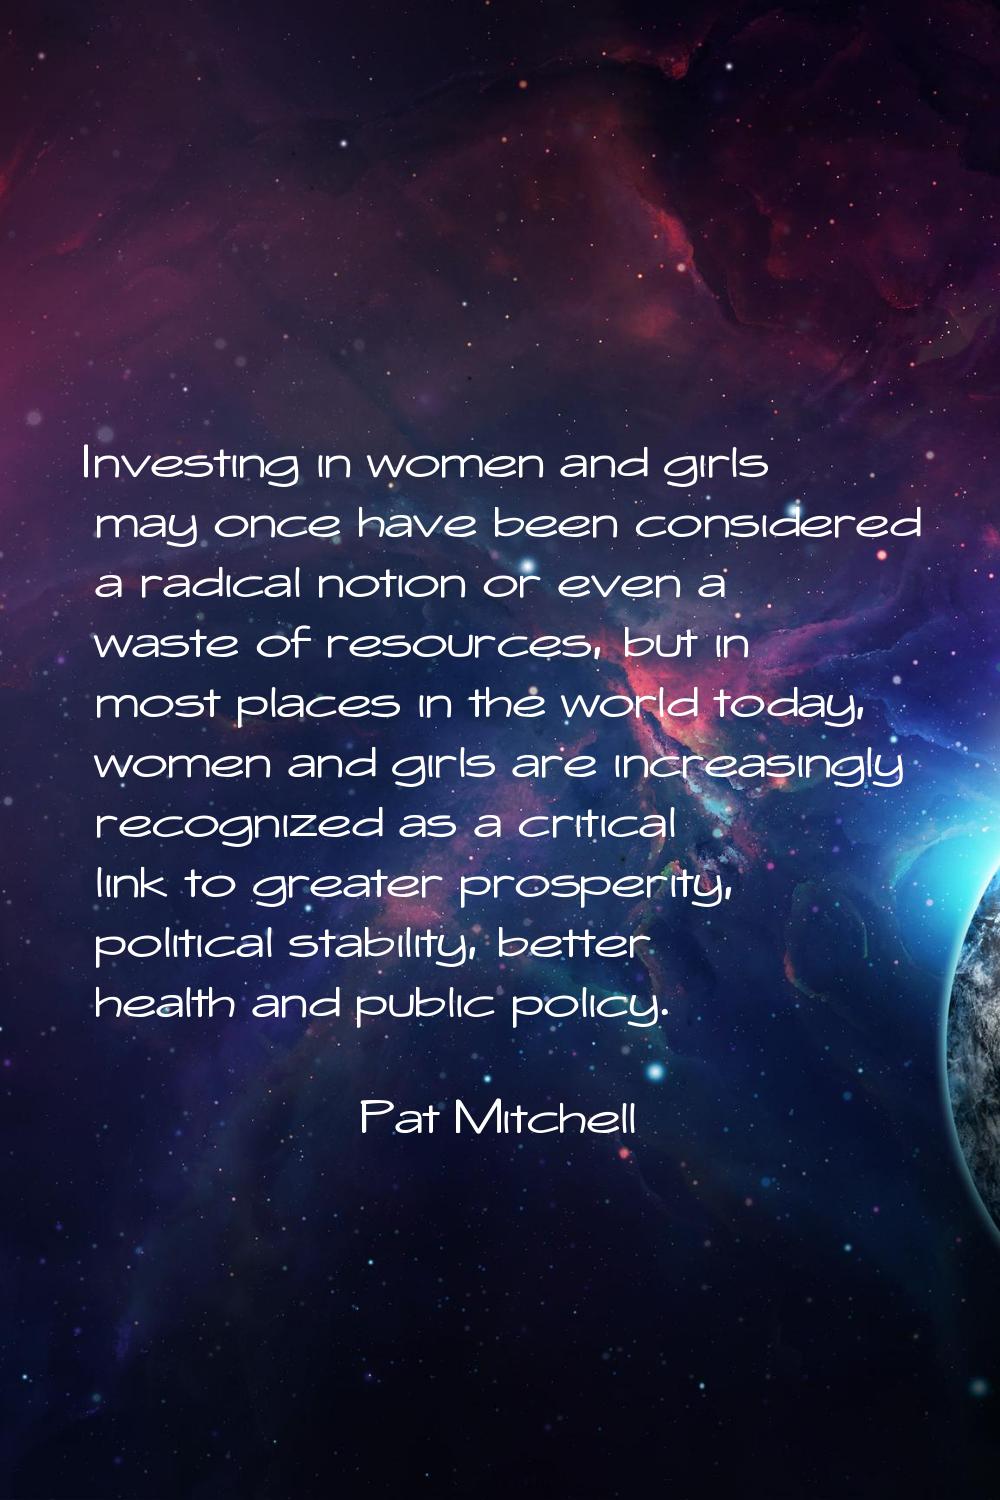 Investing in women and girls may once have been considered a radical notion or even a waste of reso